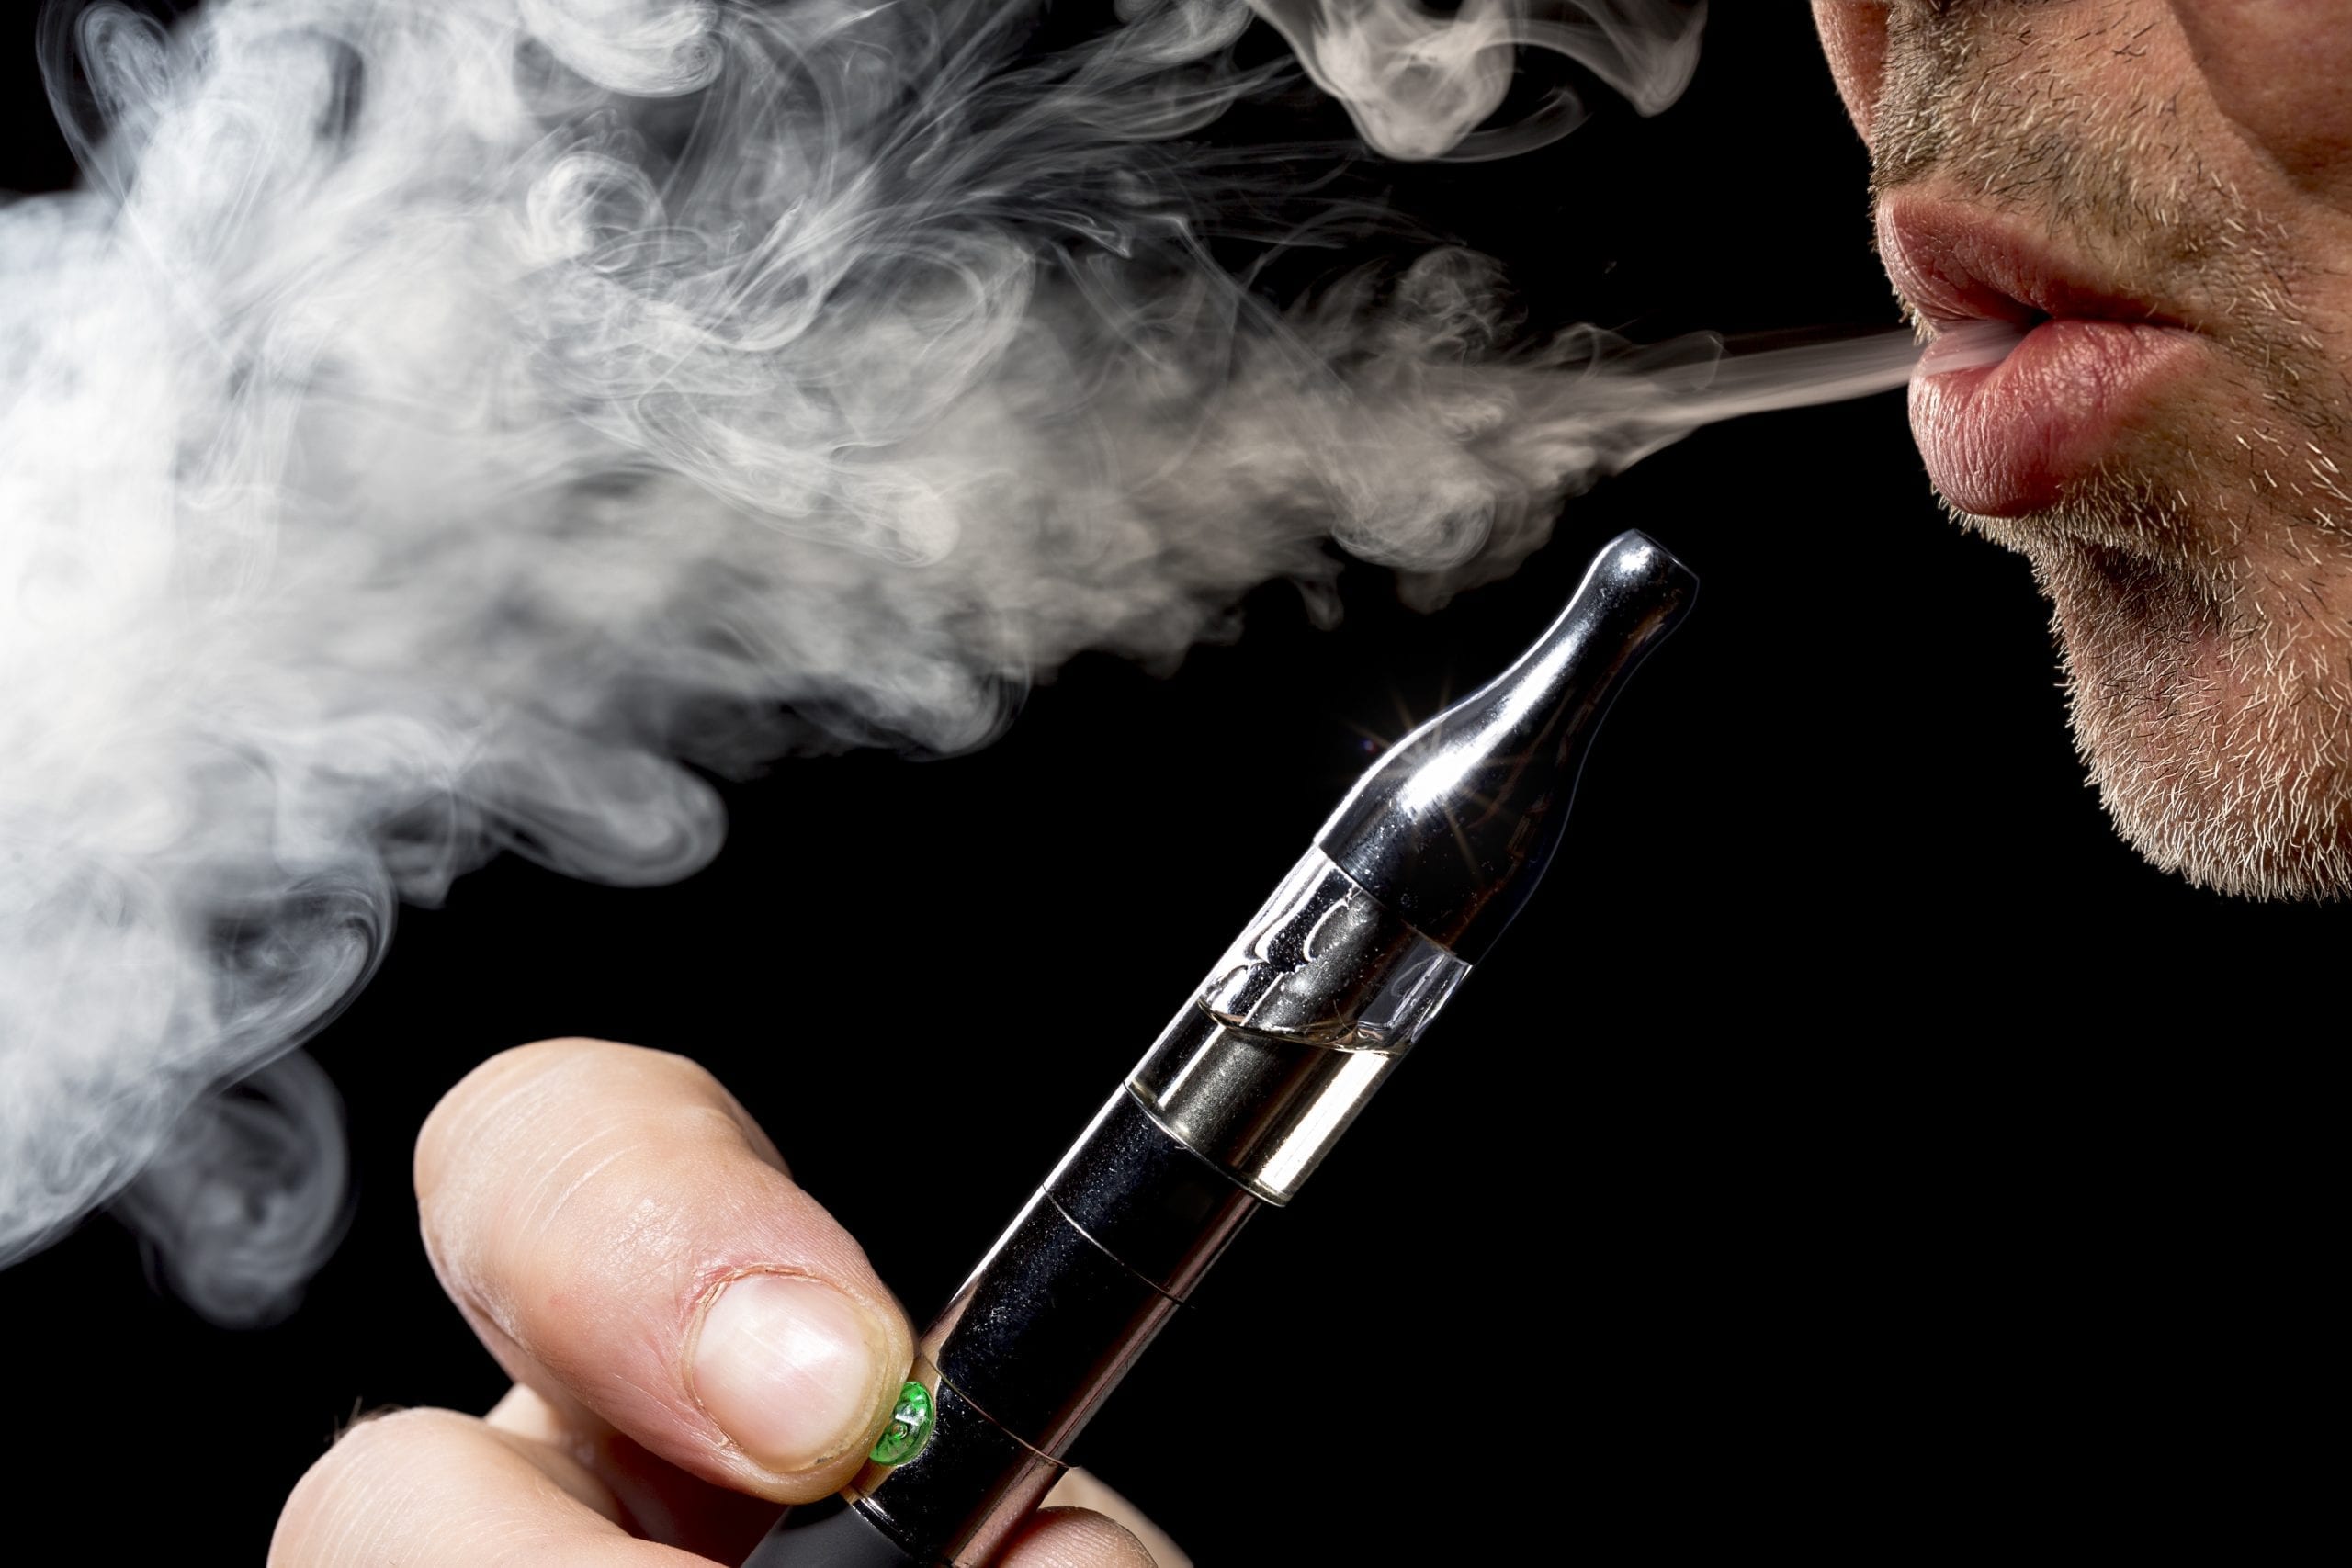 Study Finds More Americans Think E-Cigarettes Cause Harm